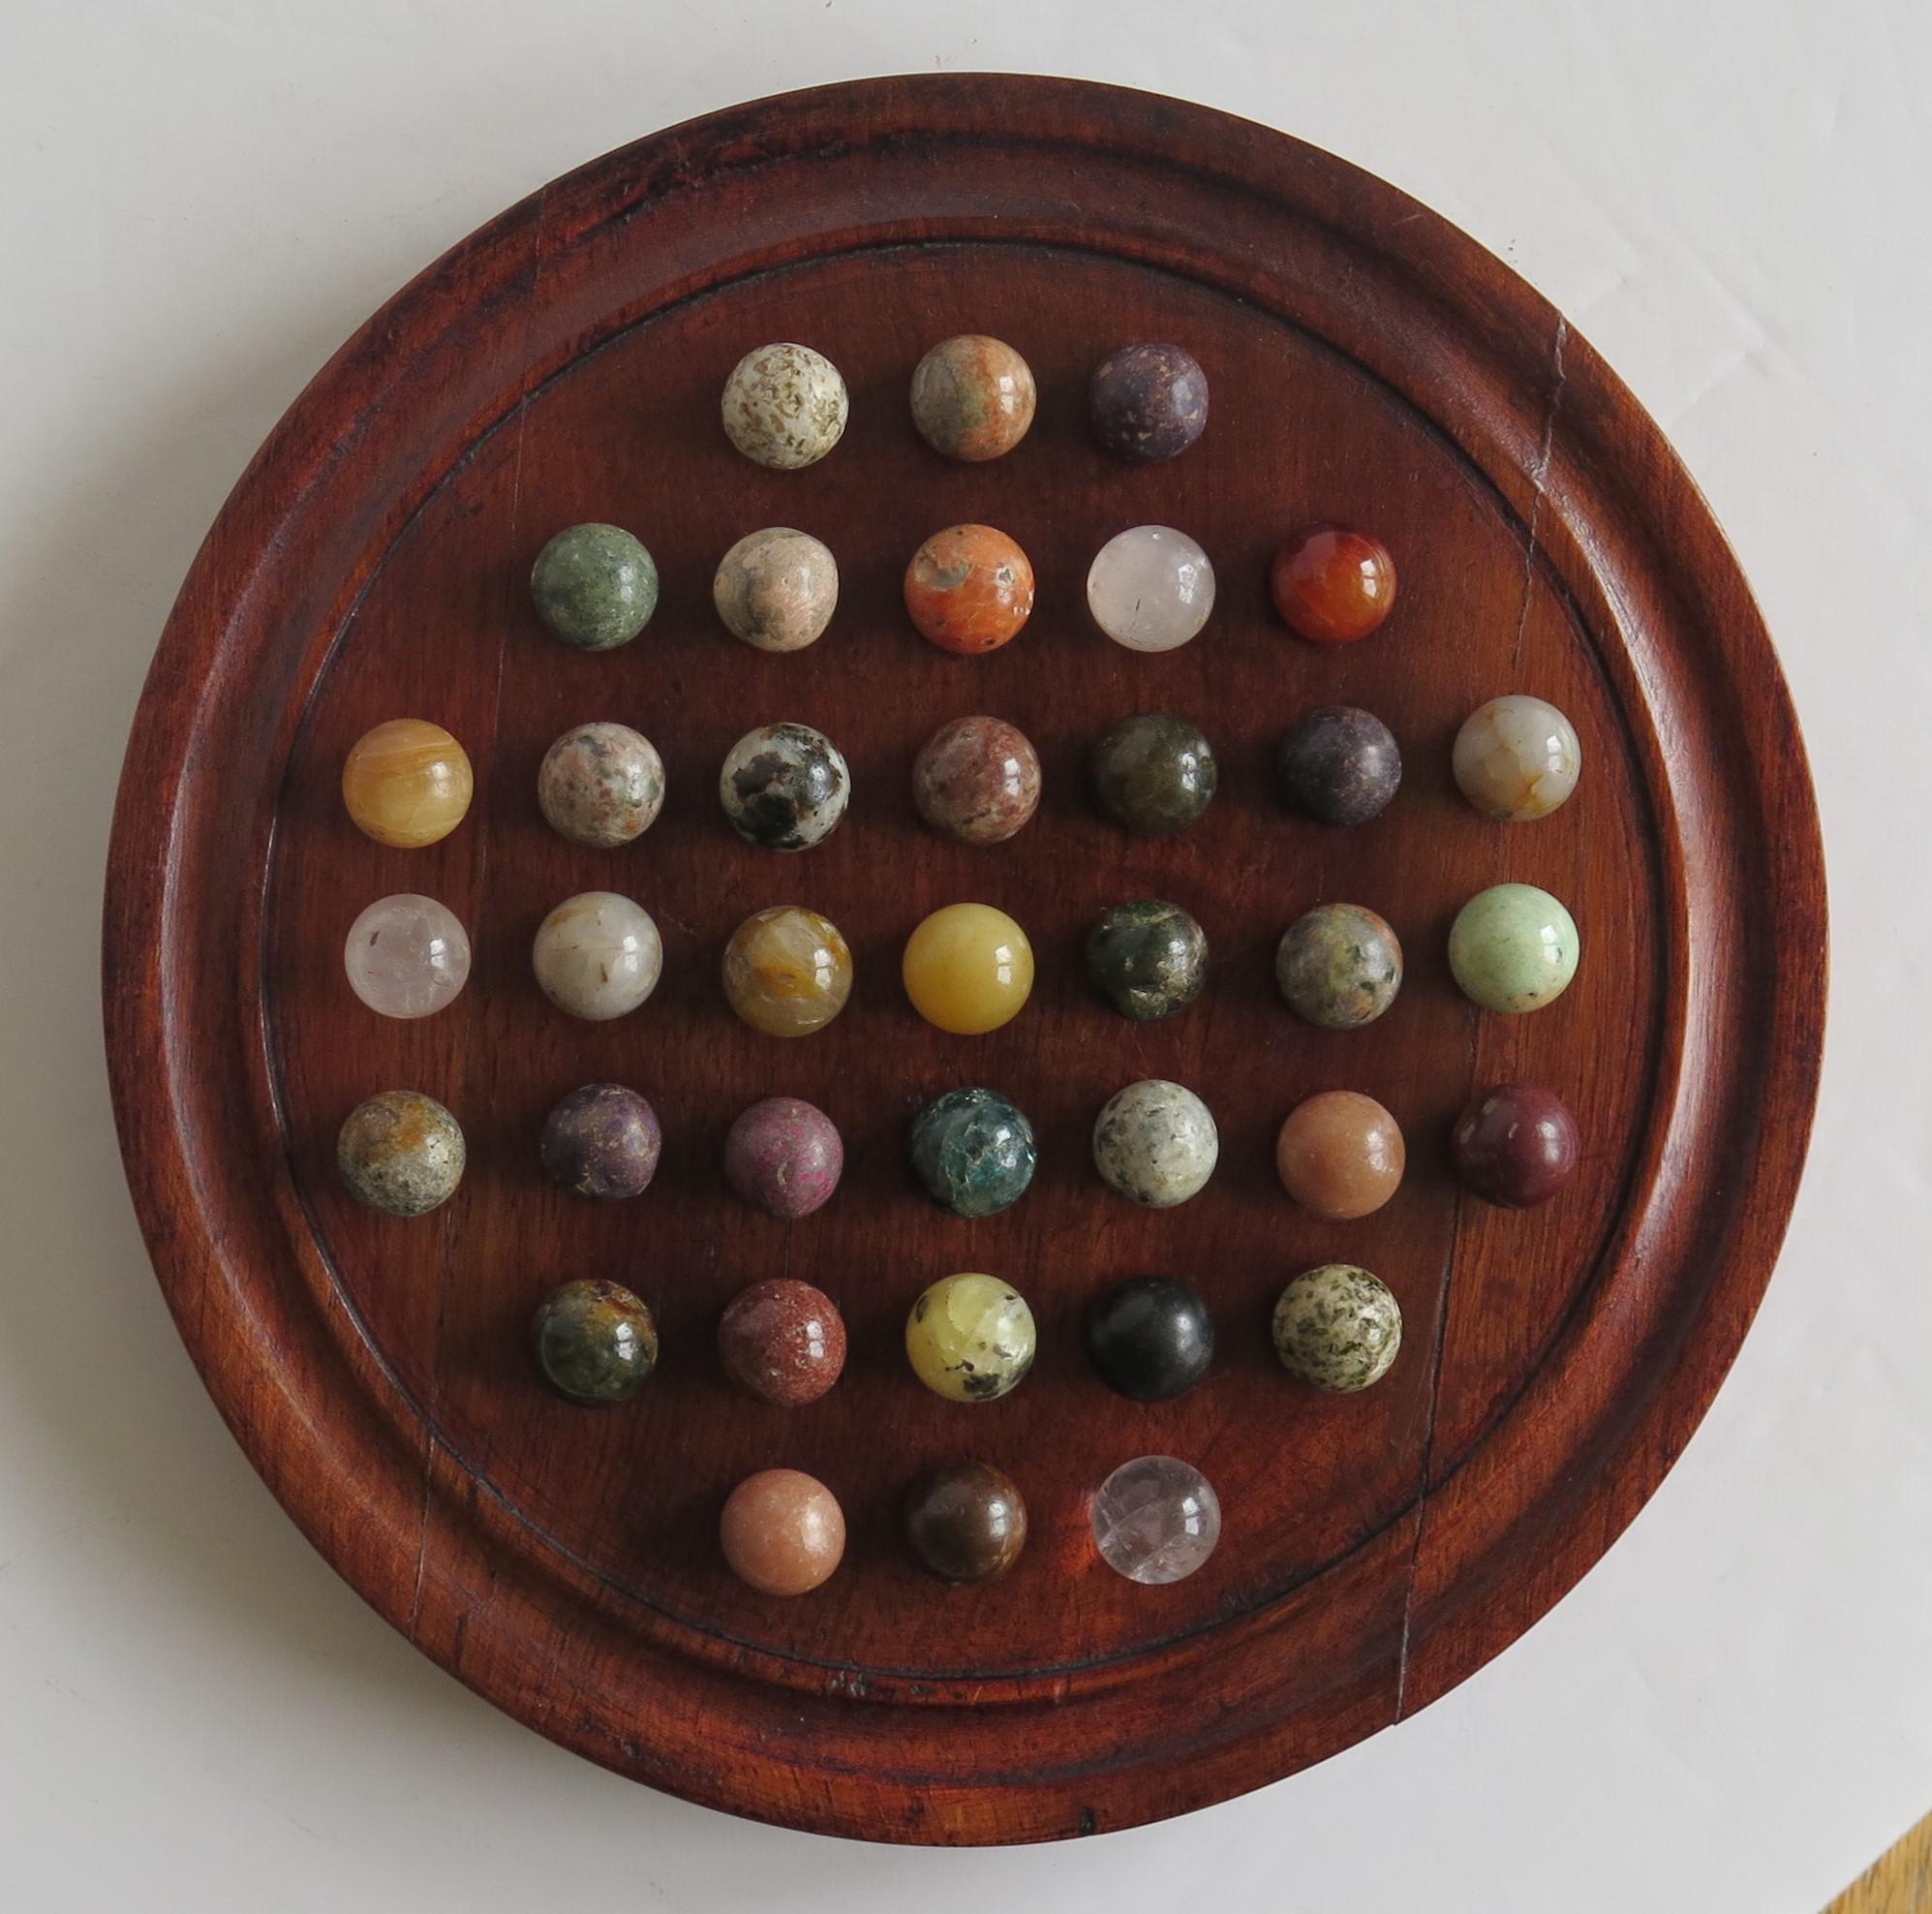 This is a complete game of 37 hole marble solitaire with a good hardwood board and 37 beautiful individual agate marbles, which we date to the early 20th century.

The circular turned board is made of Hardwood with a gallery to the outer rim and